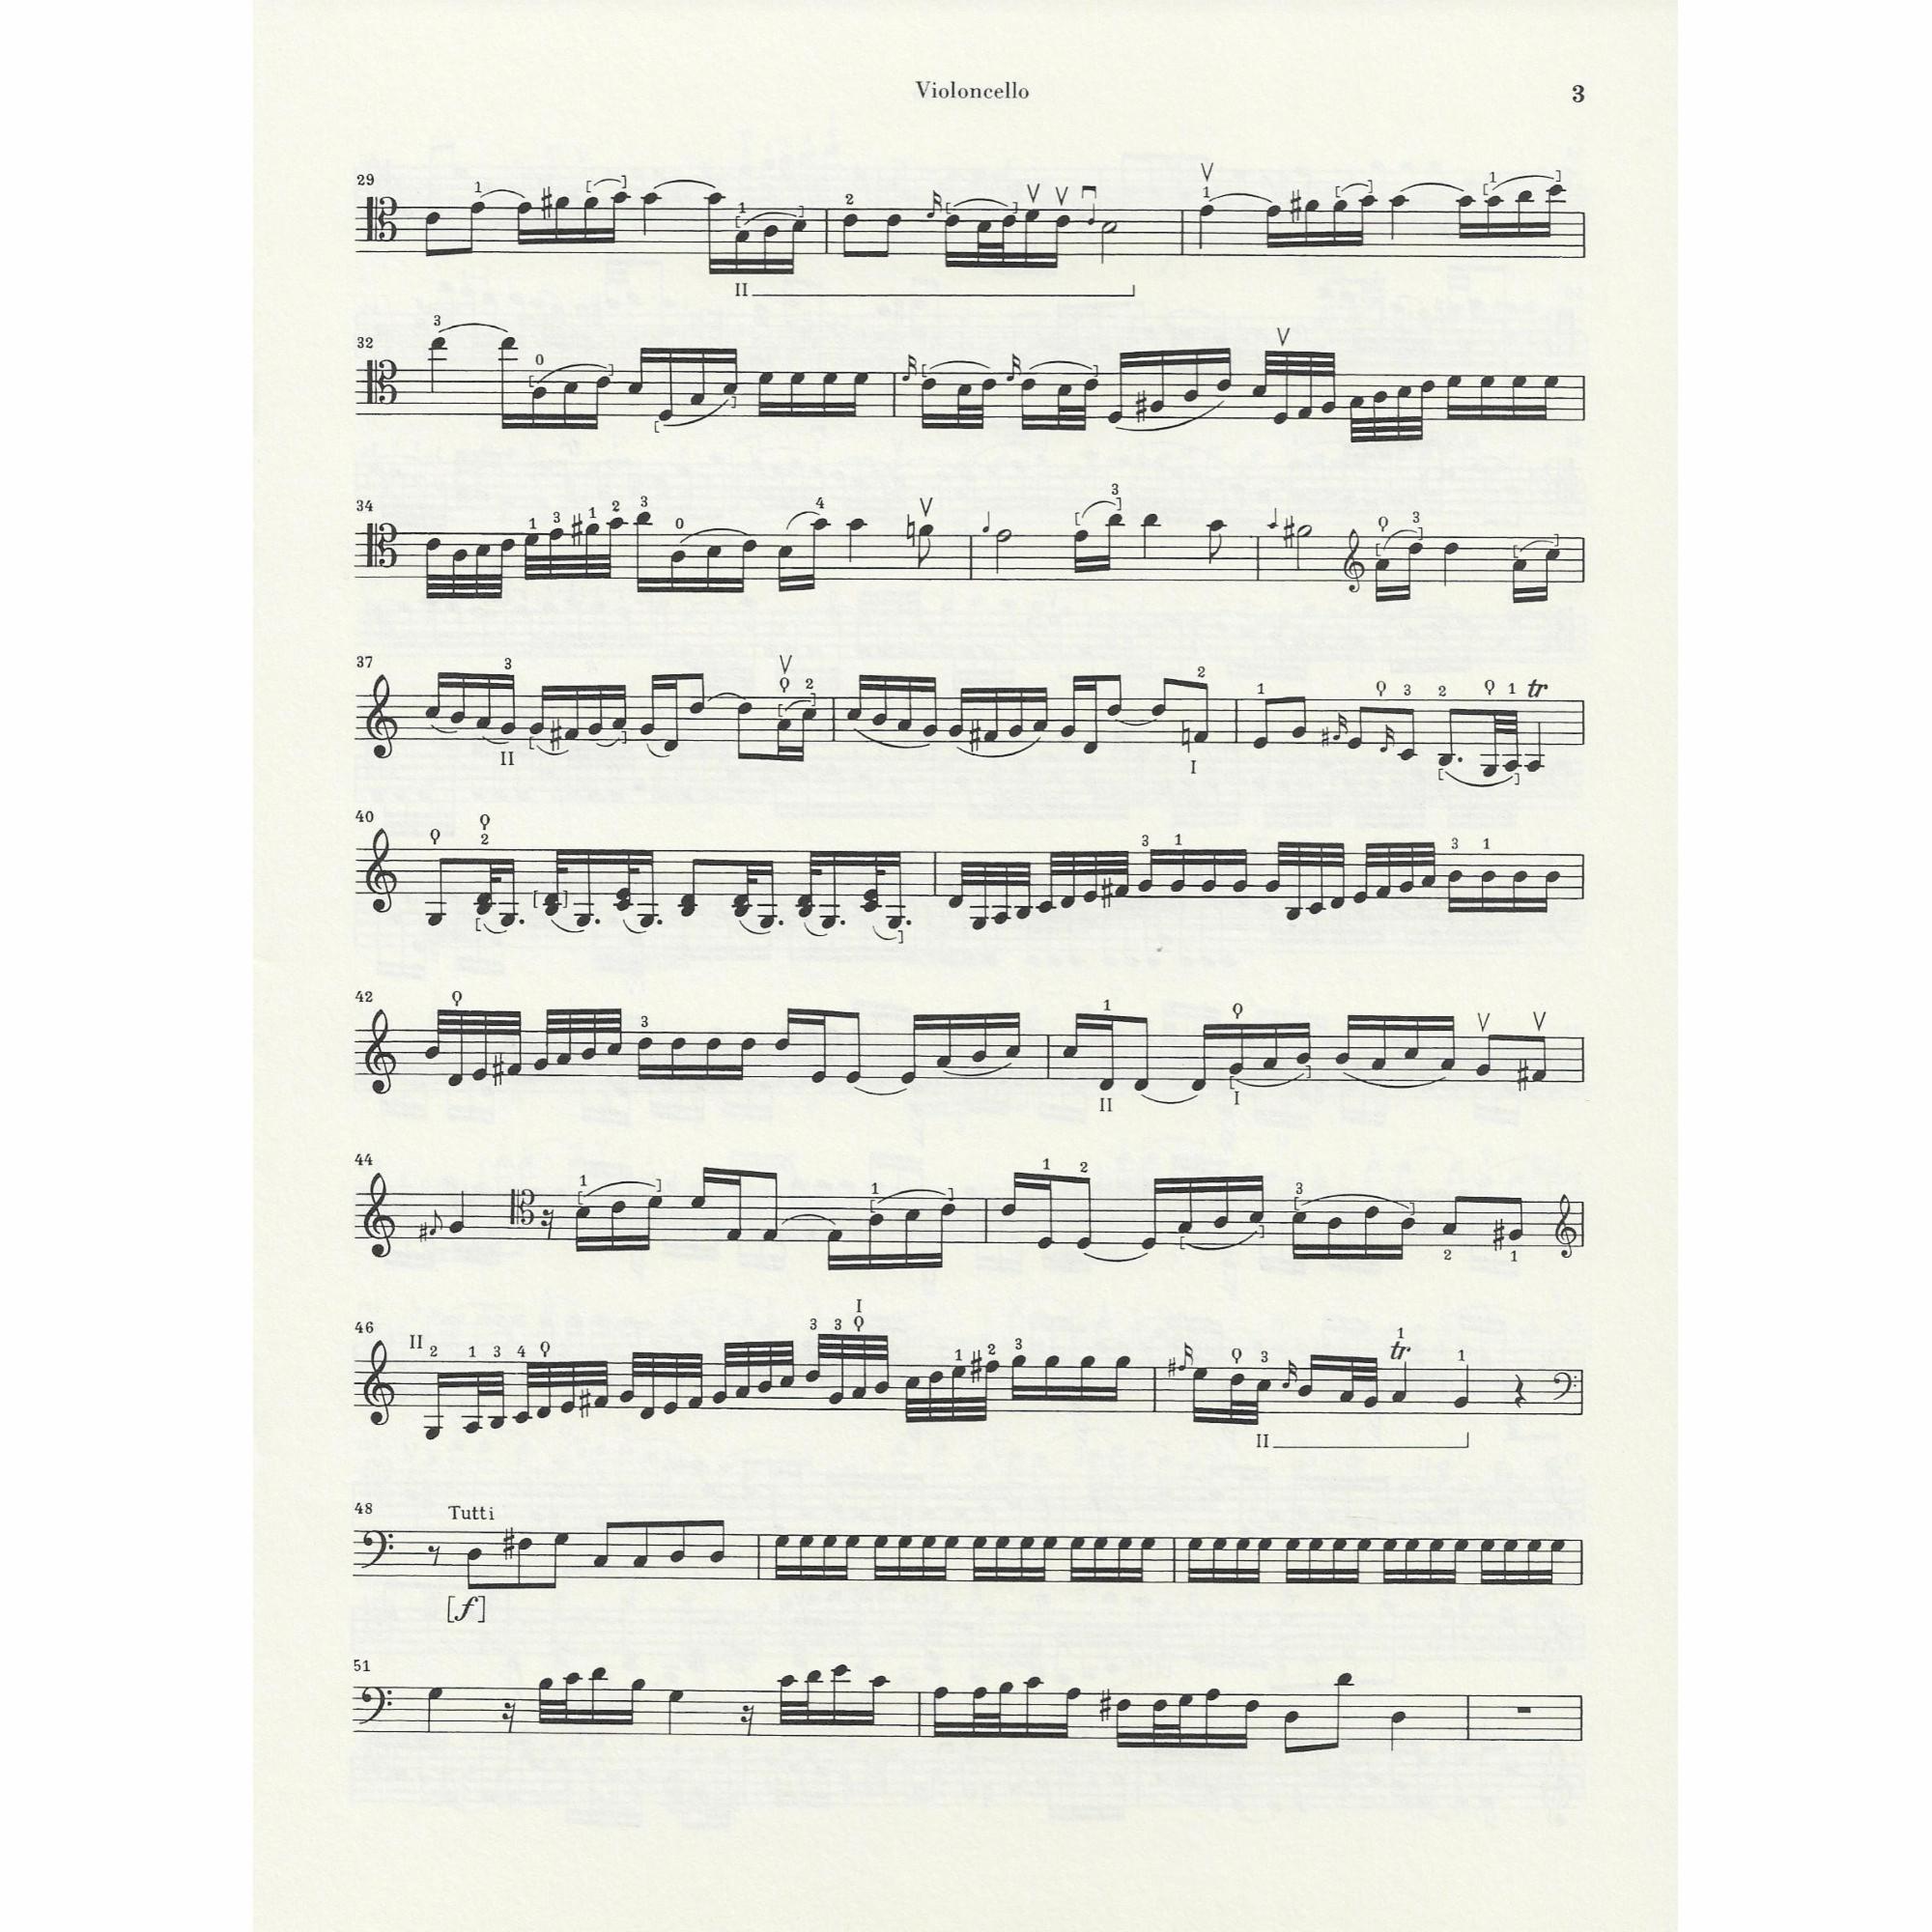 Sample: Marked Cello Part (Pg. 2)